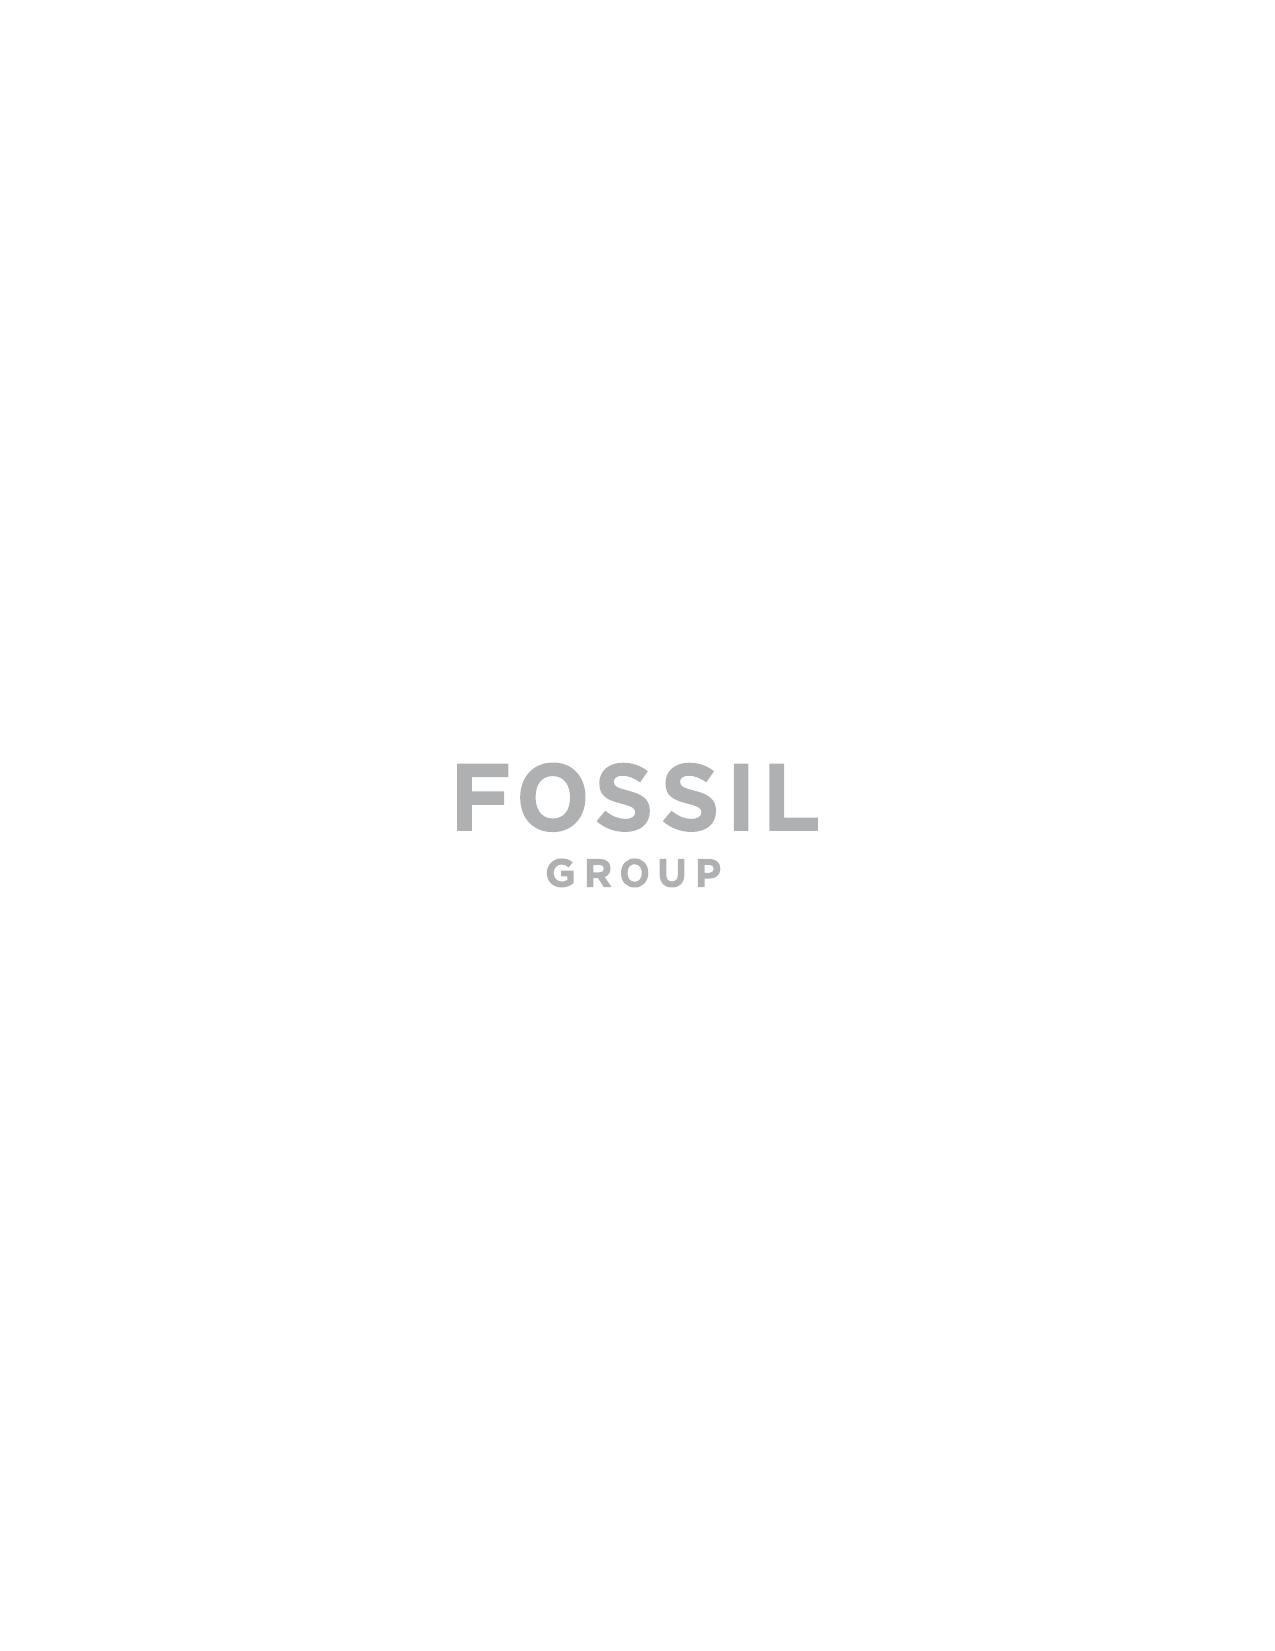 FOSSILGROUP 2023 Annual Report